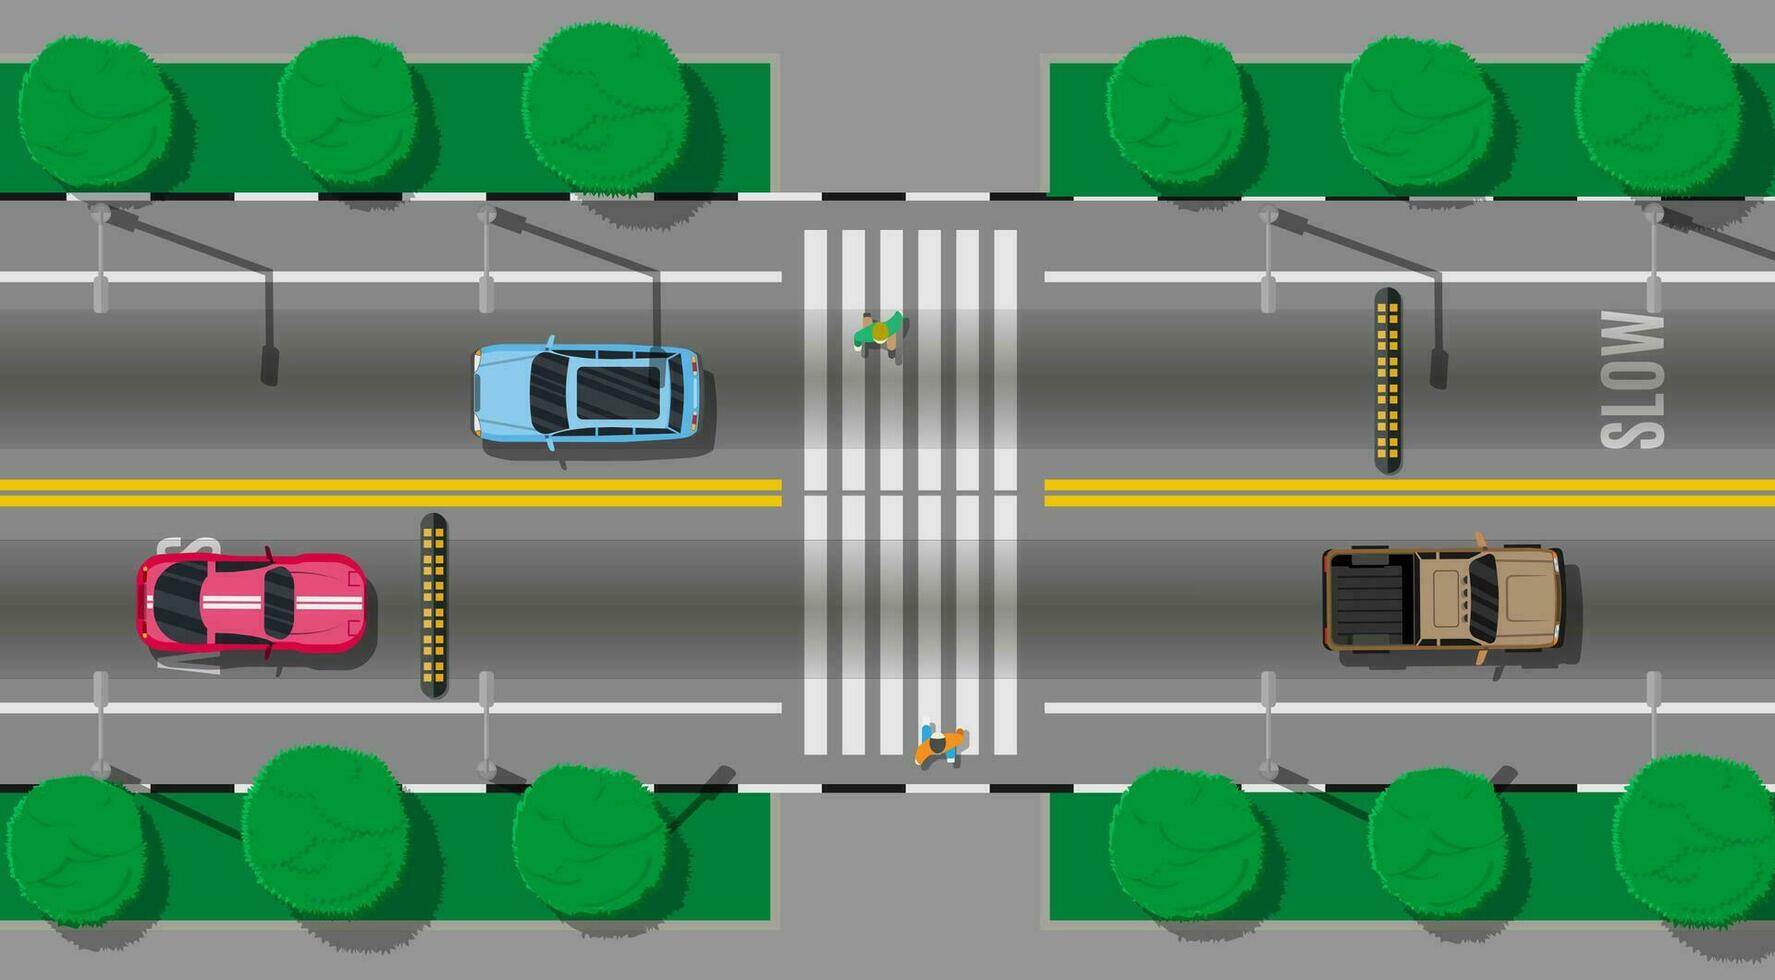 Pedestrian crossing with speed bump. Vehicles on road. Cars waiting for people to cross the street. Traffic regulations. Rules of the road. Highway top view. Vector illustration in flat style